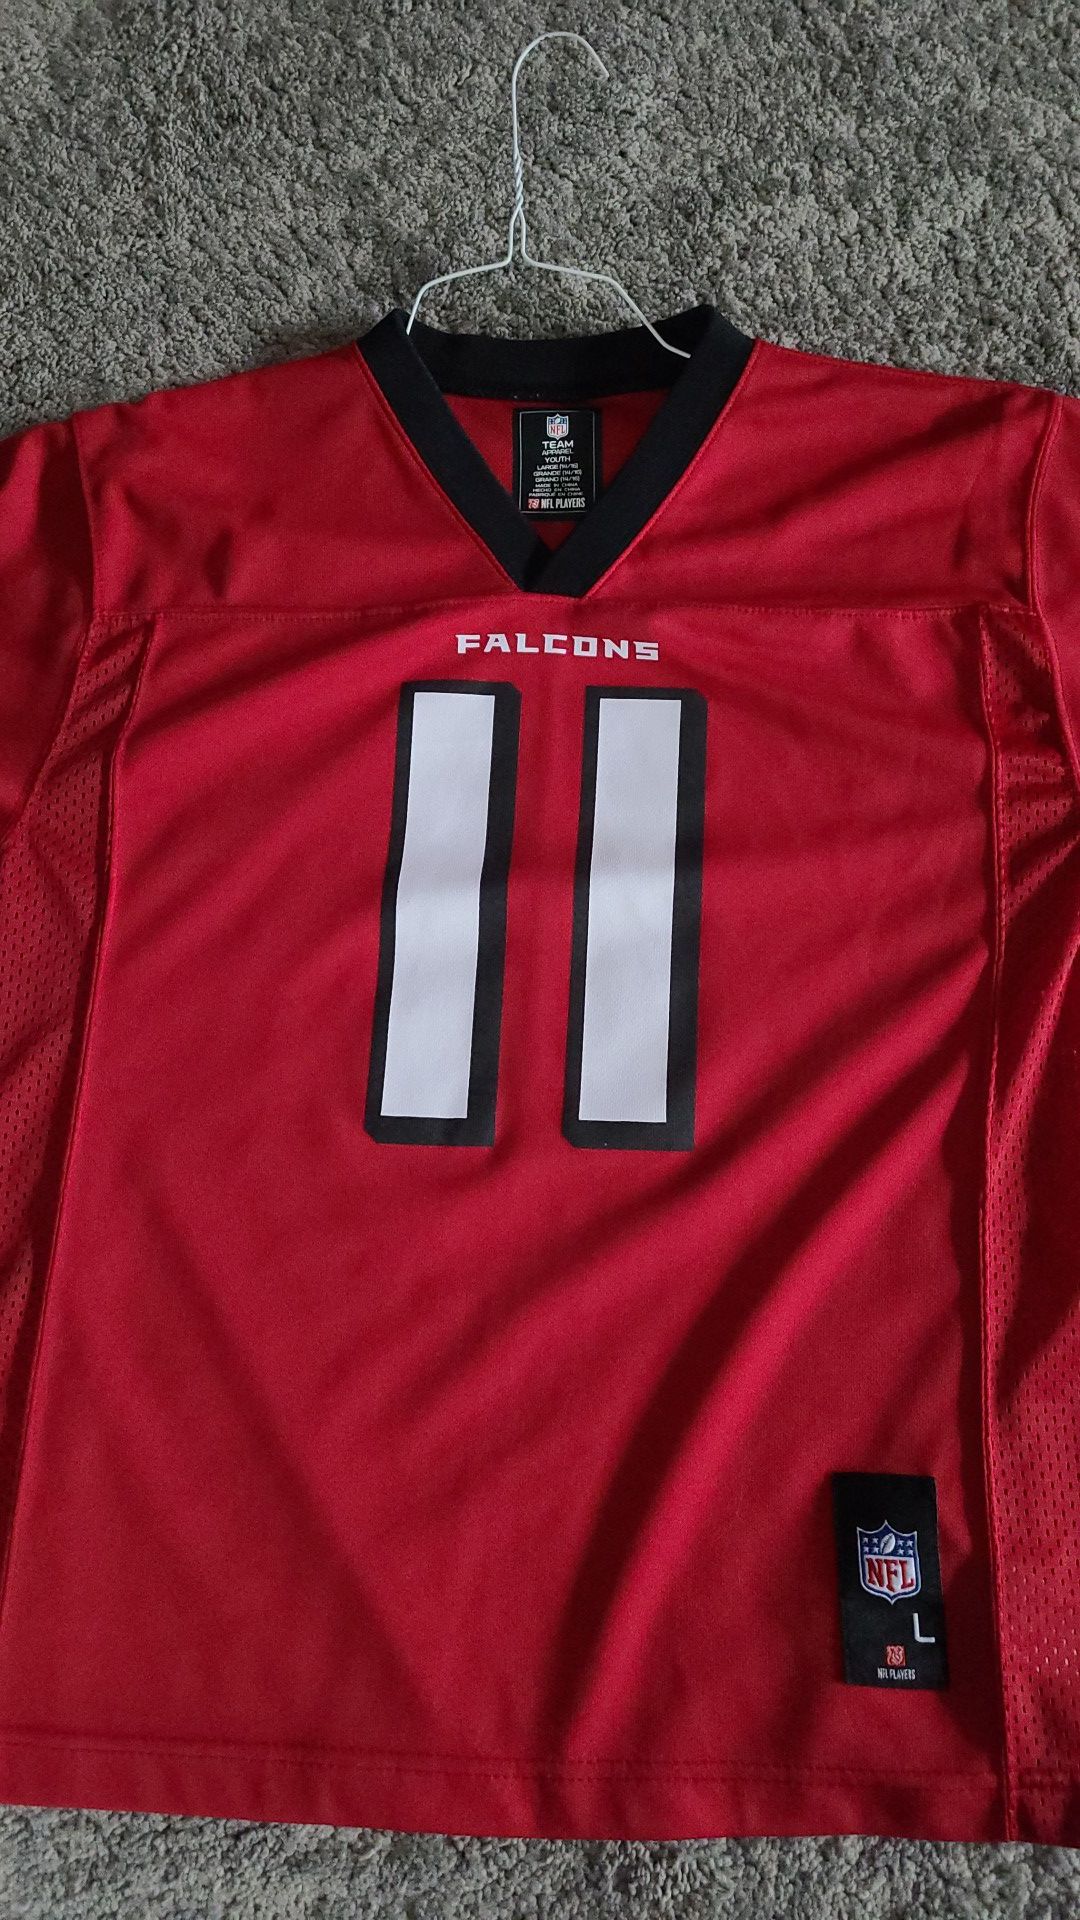 Falcons Jones Jersey youth Large